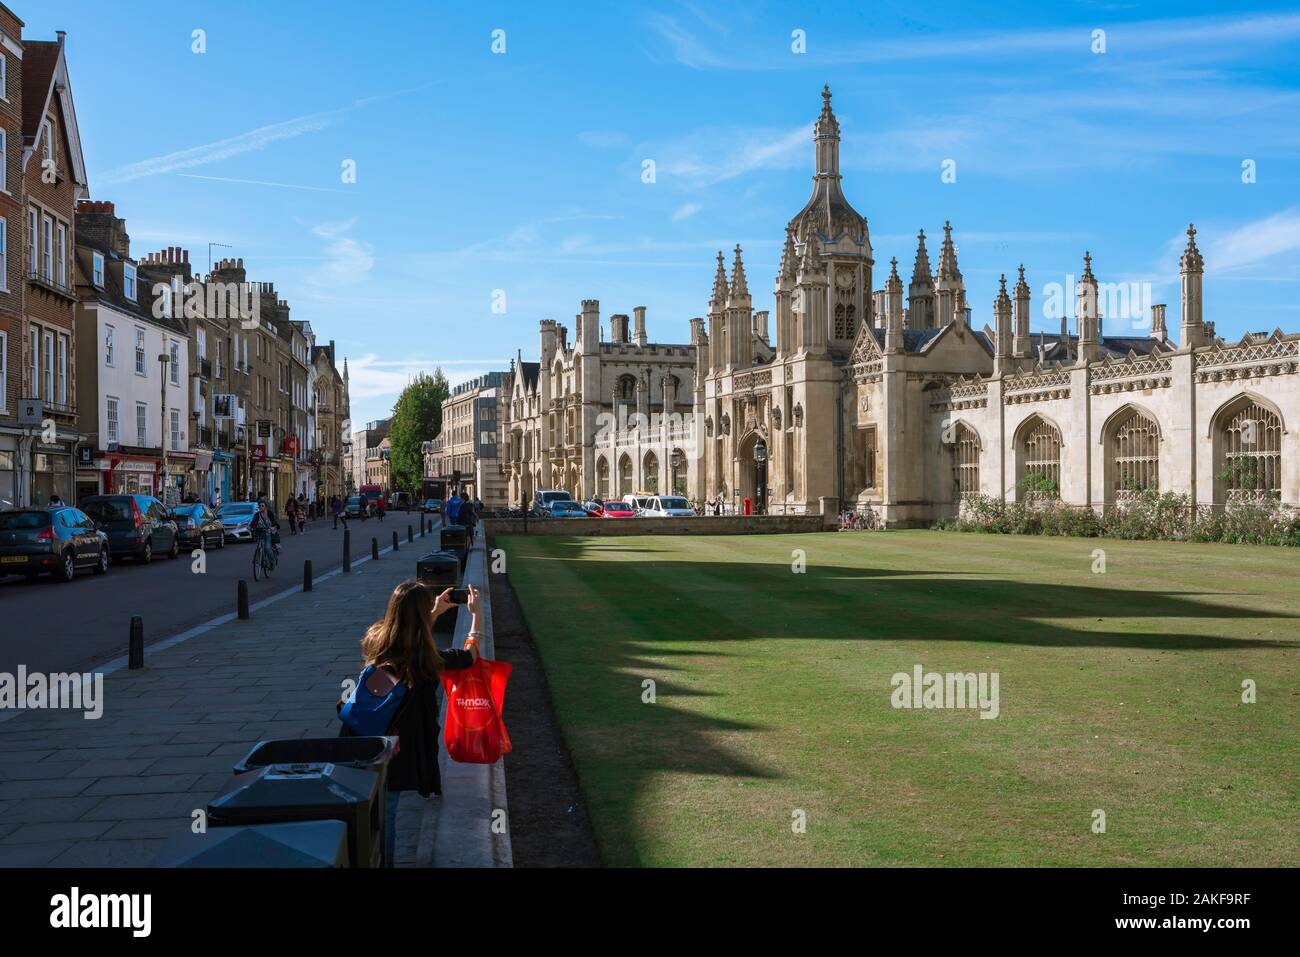 King's Parade Cambridge, rear view of a young woman with a shopping bag taking a photo of the ornate porter's lodge of King's College in Cambridge UK Stock Photo